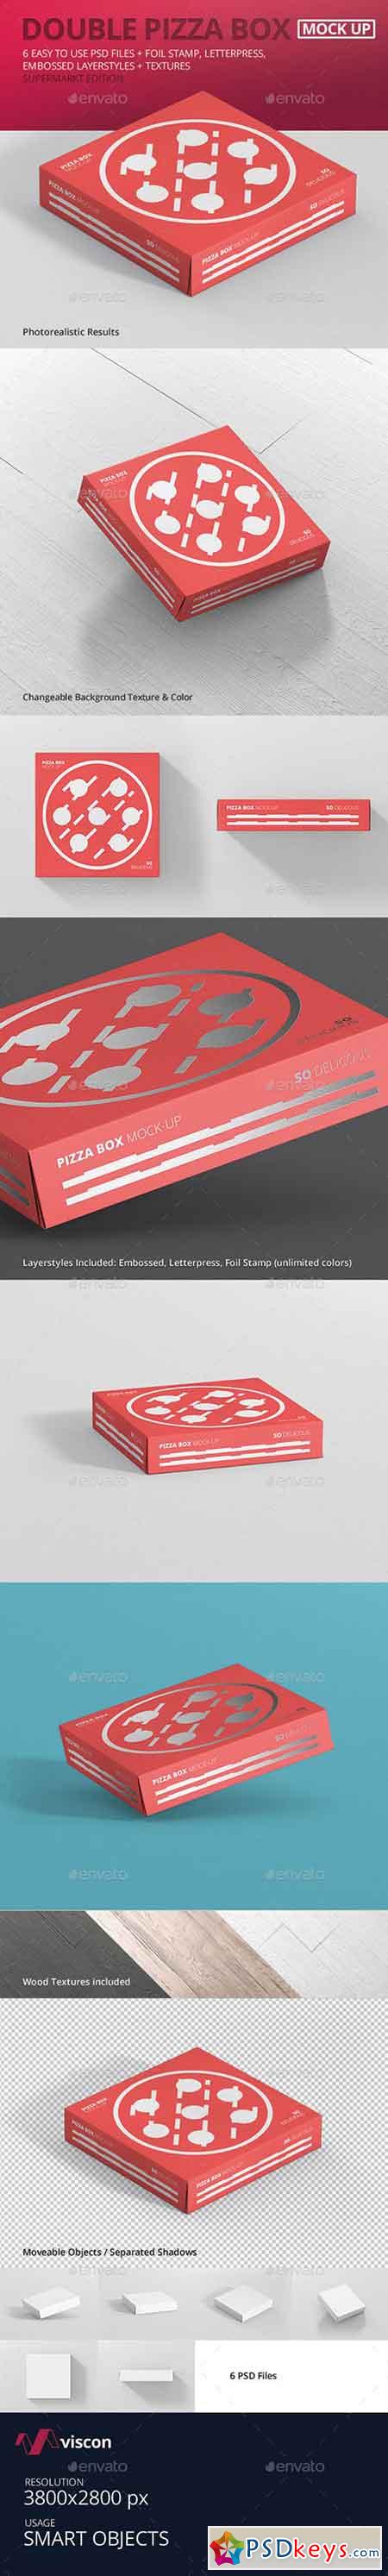 Pizza Box Mockup - Double Pack Supermarket Edition 16365341